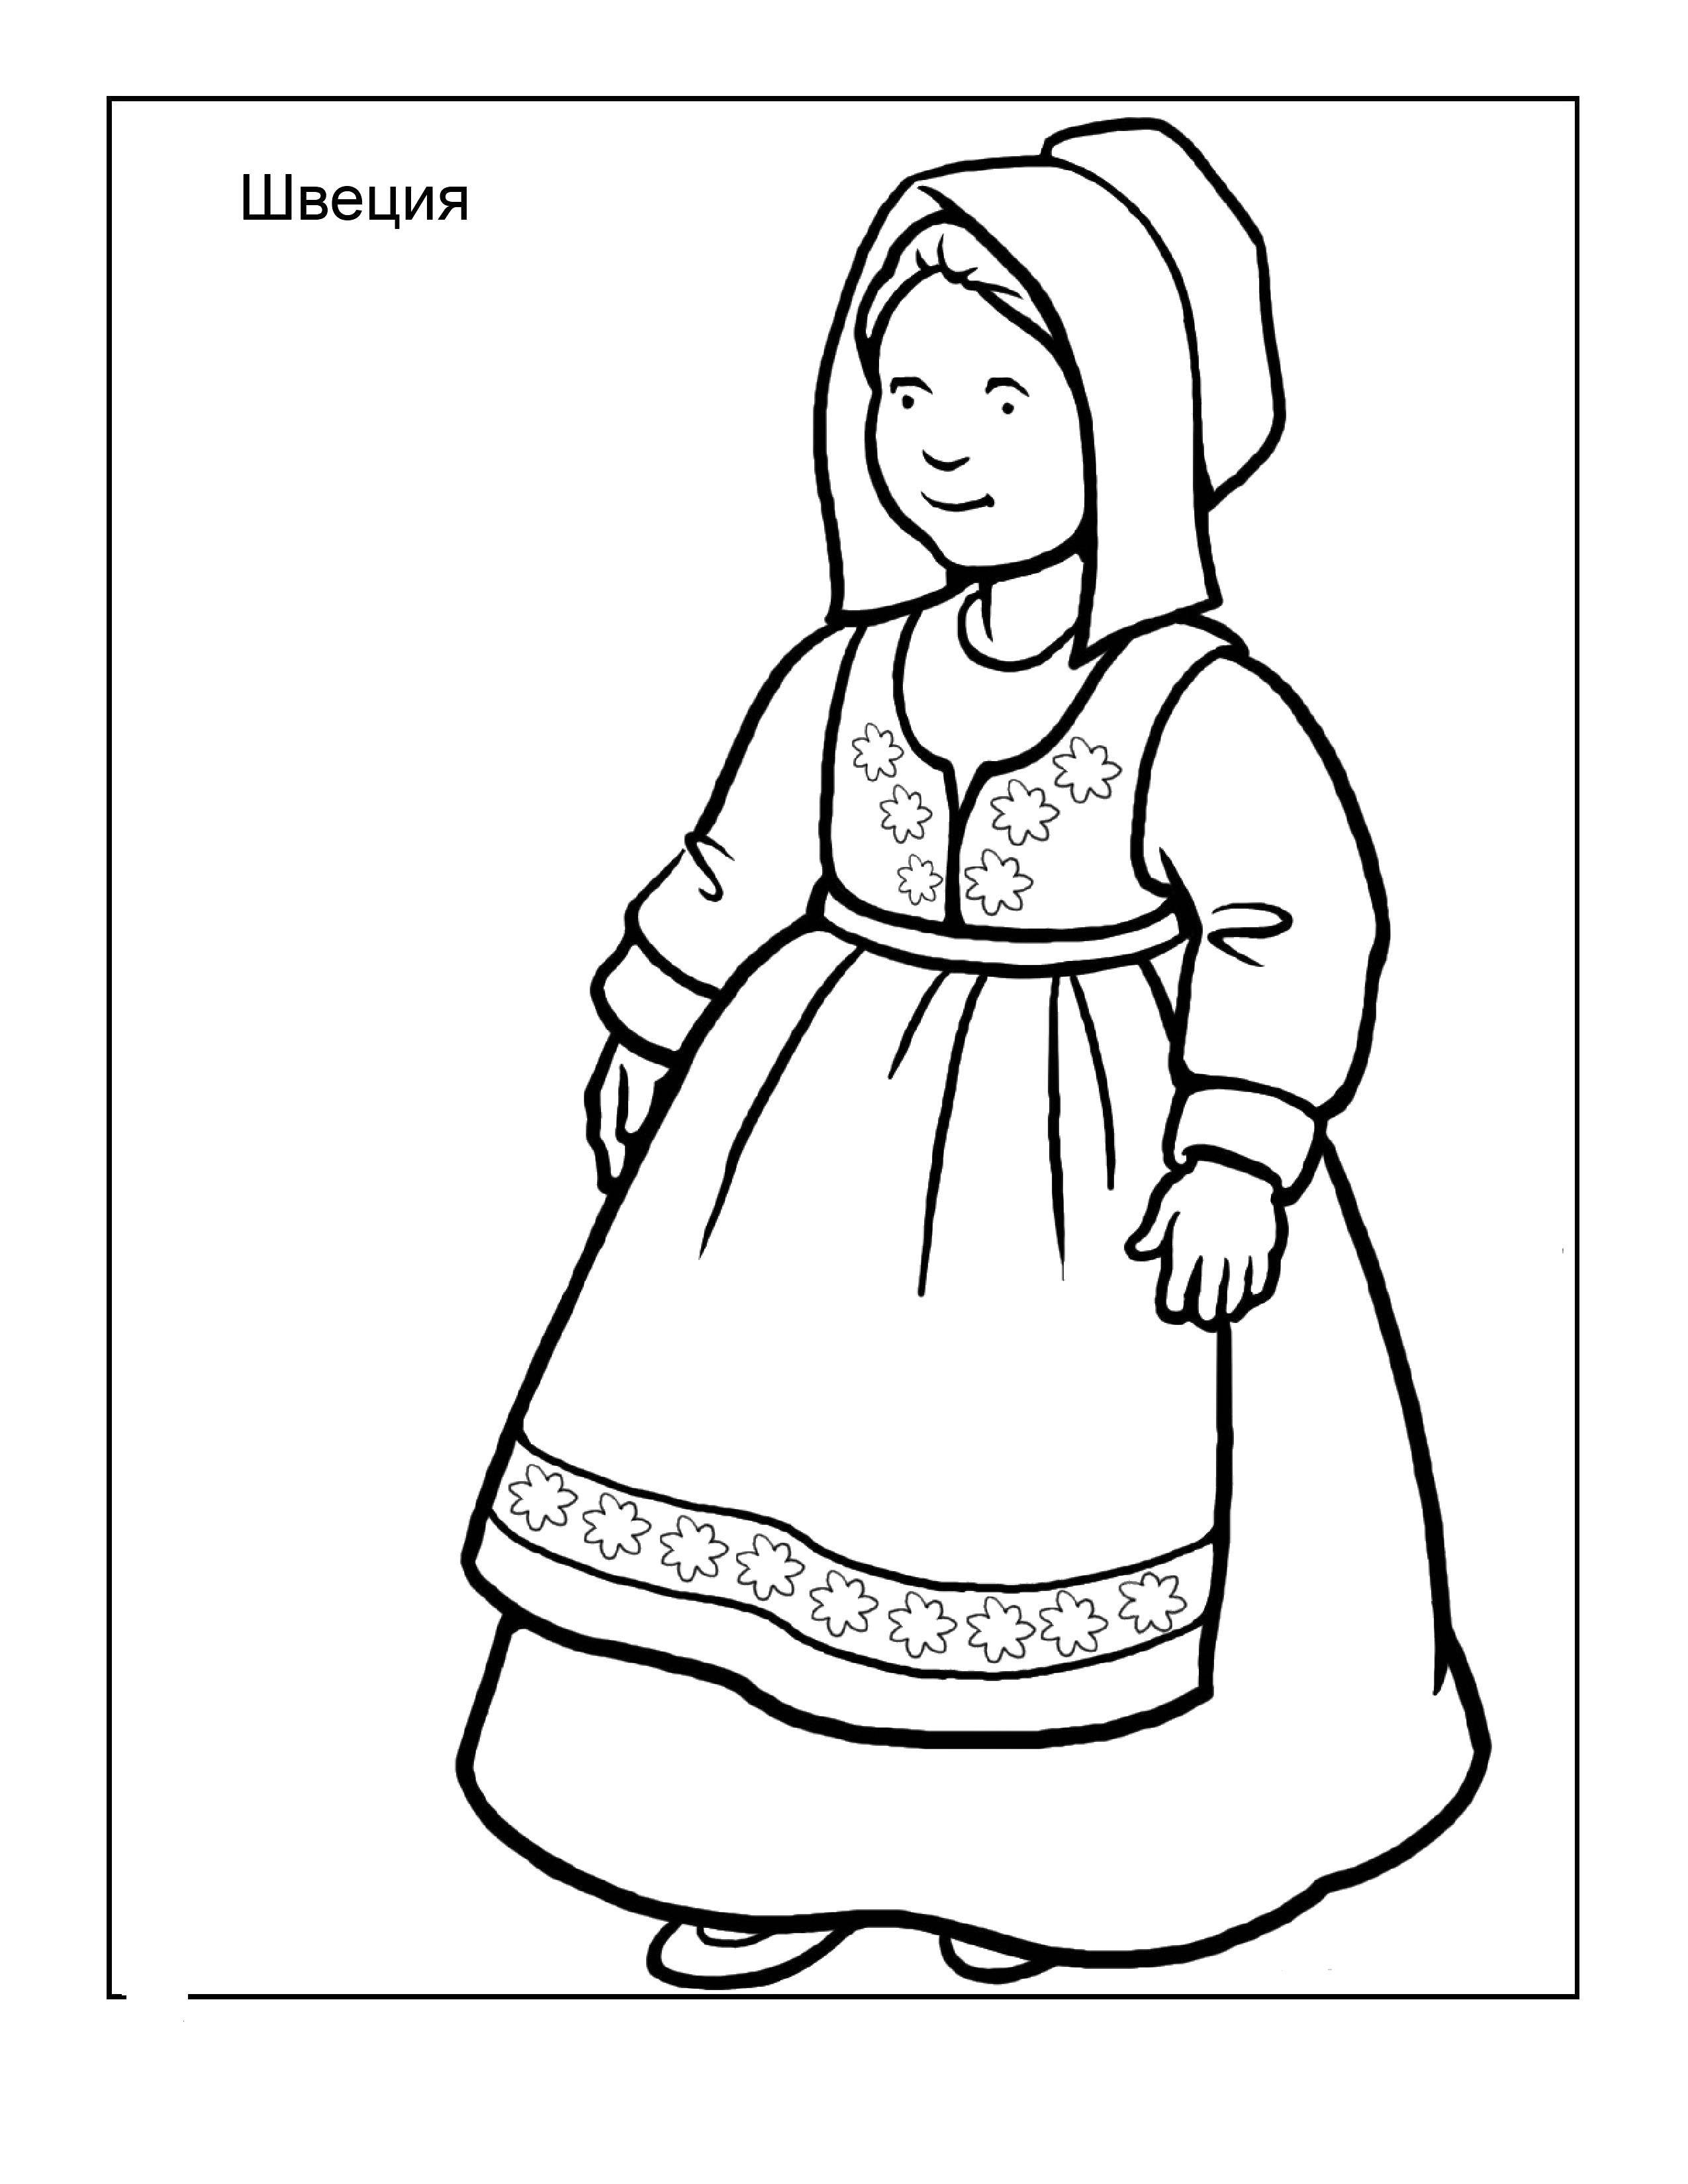 Coloring Sweden. Category The culture of different countries of the world . Tags:  Sweden.